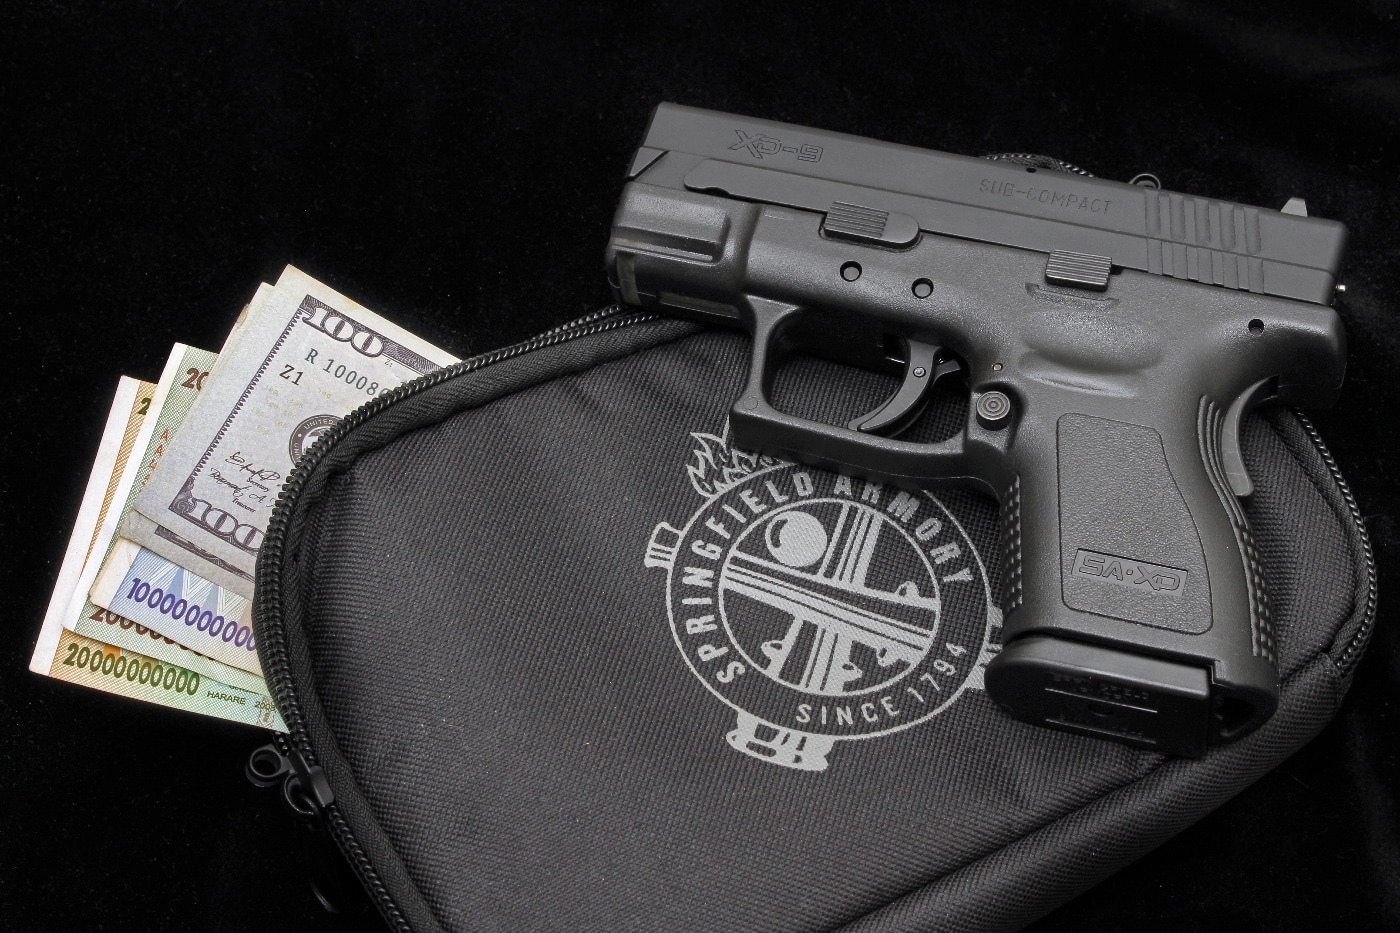 Shown in this digital photograph is a Springfield Armory XD9 subcompact pistol. The author suggests it is good as an investment over the long term.